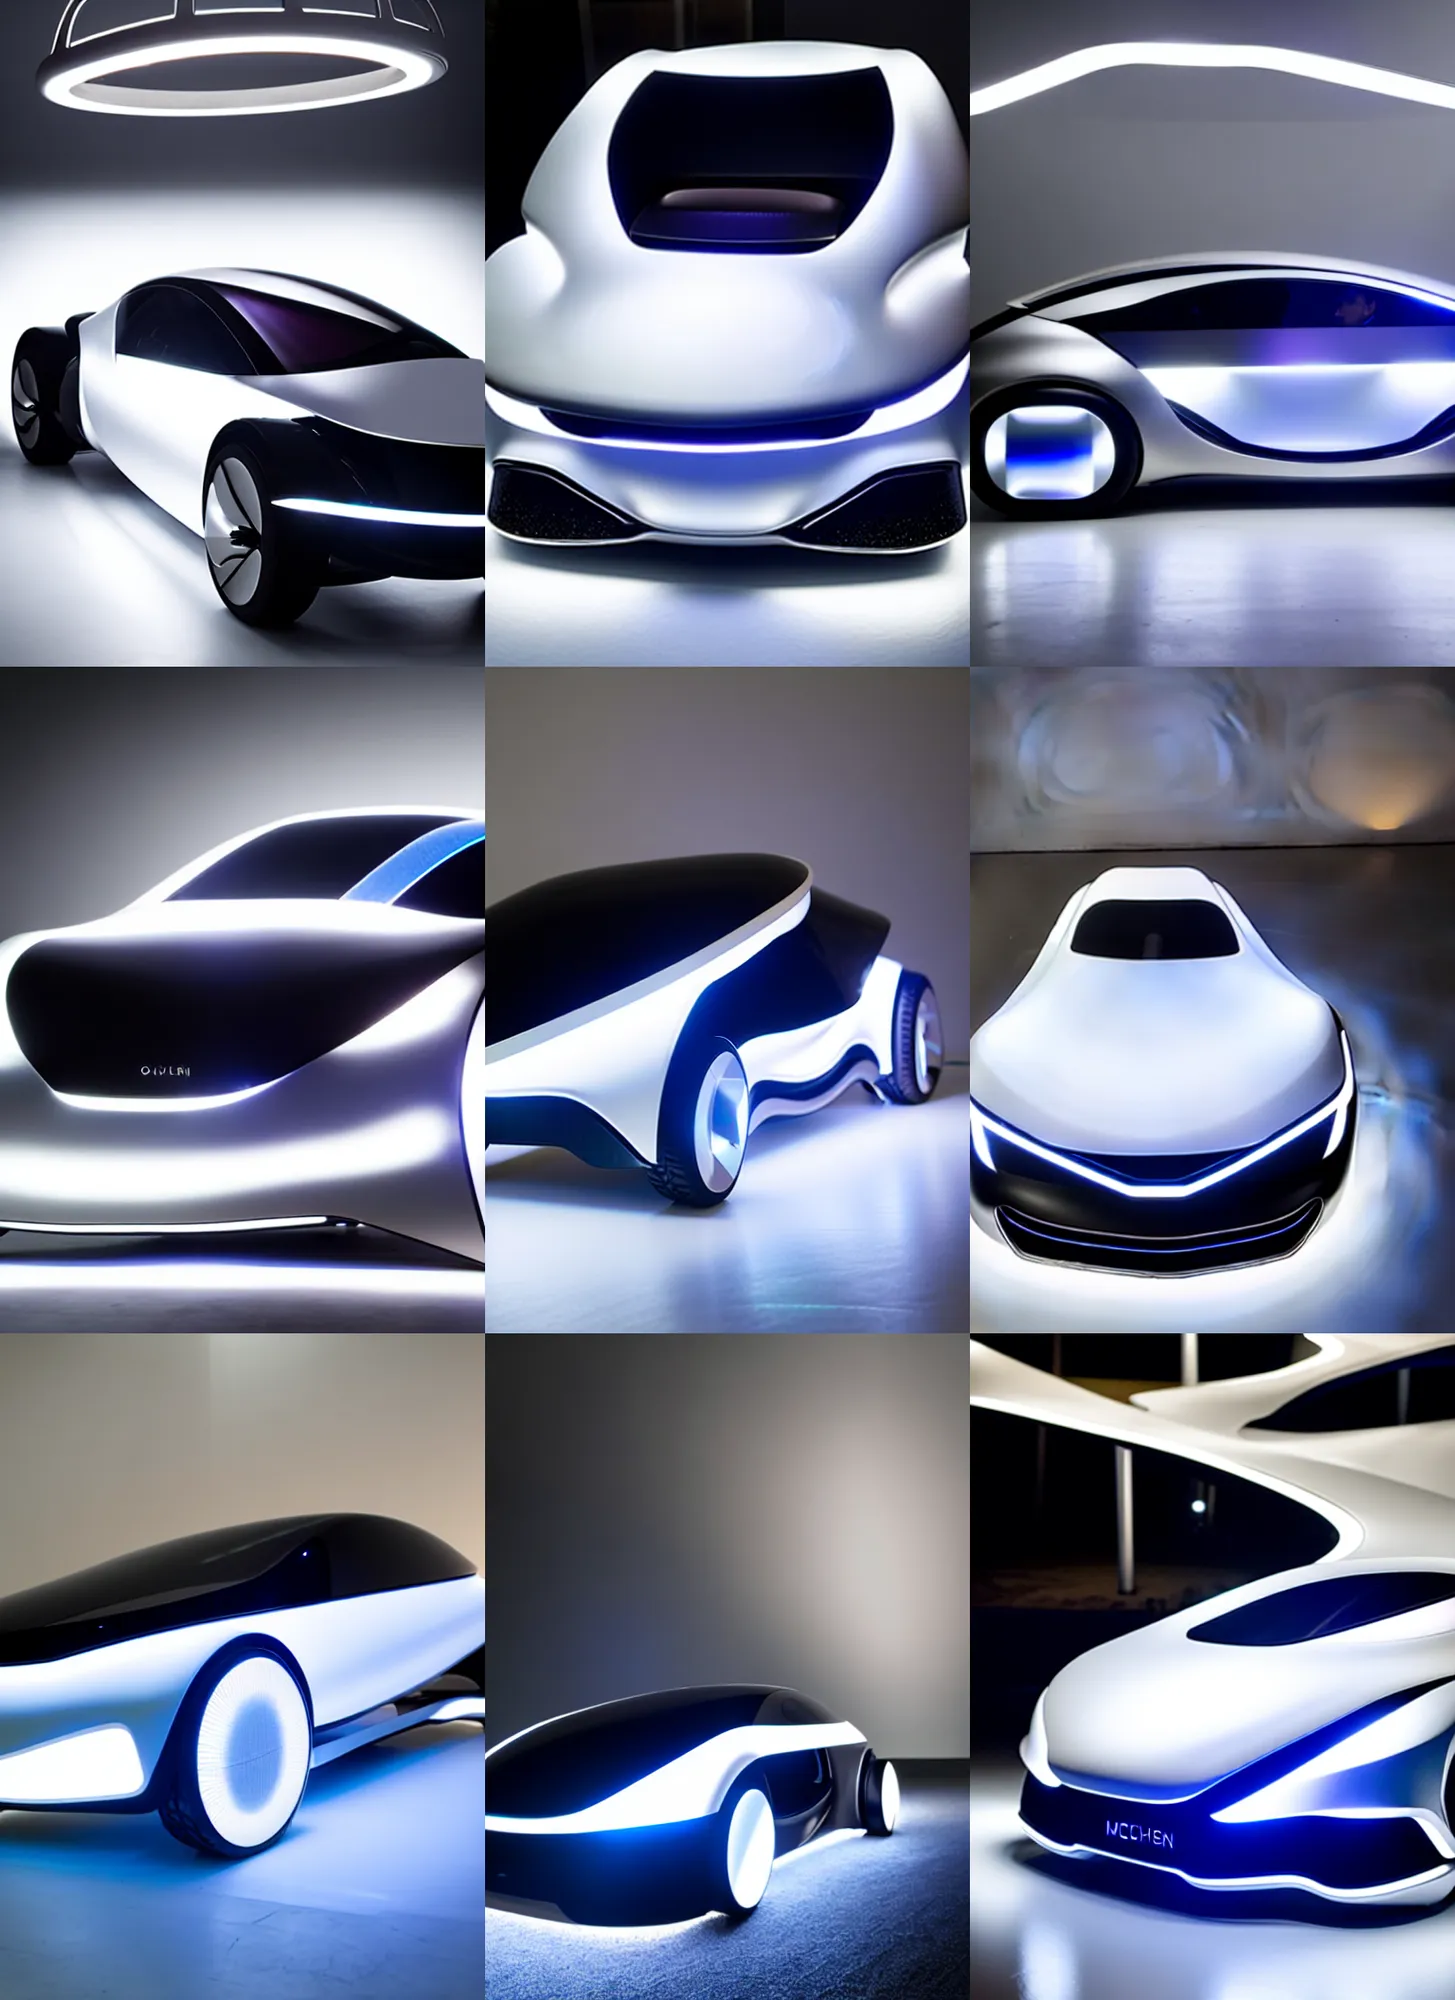 Prompt: a high - tech modern lustrous fashion ( future city car concept ) designed by modern architecture, oak, glass, brushed aluminum, tasteful oled strip accent lighting